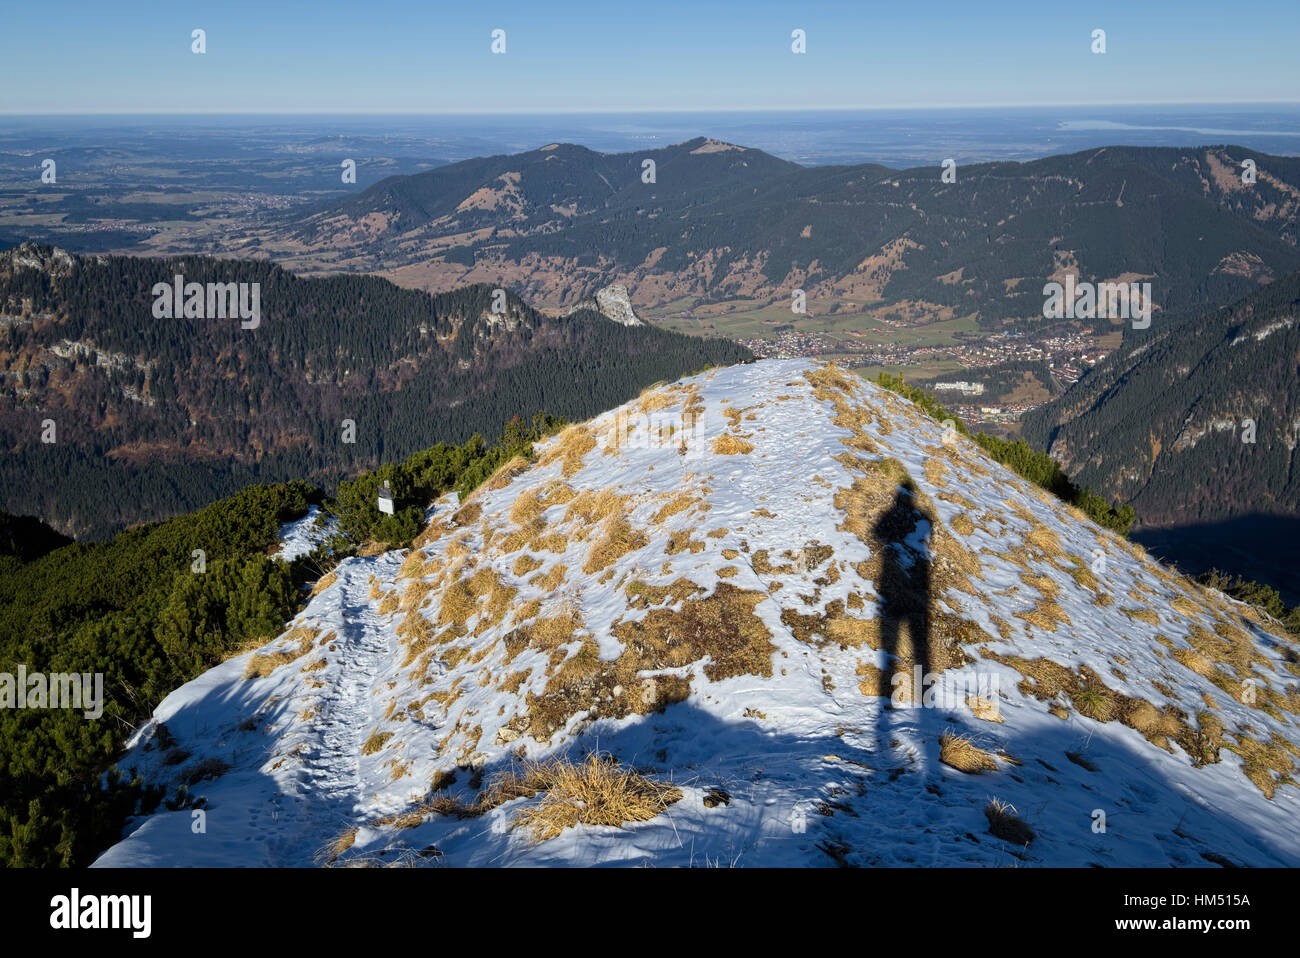 large shadow of hiker taking picture at summit of mountain Notkarspitze, Bavaria, Germany Stock Photo